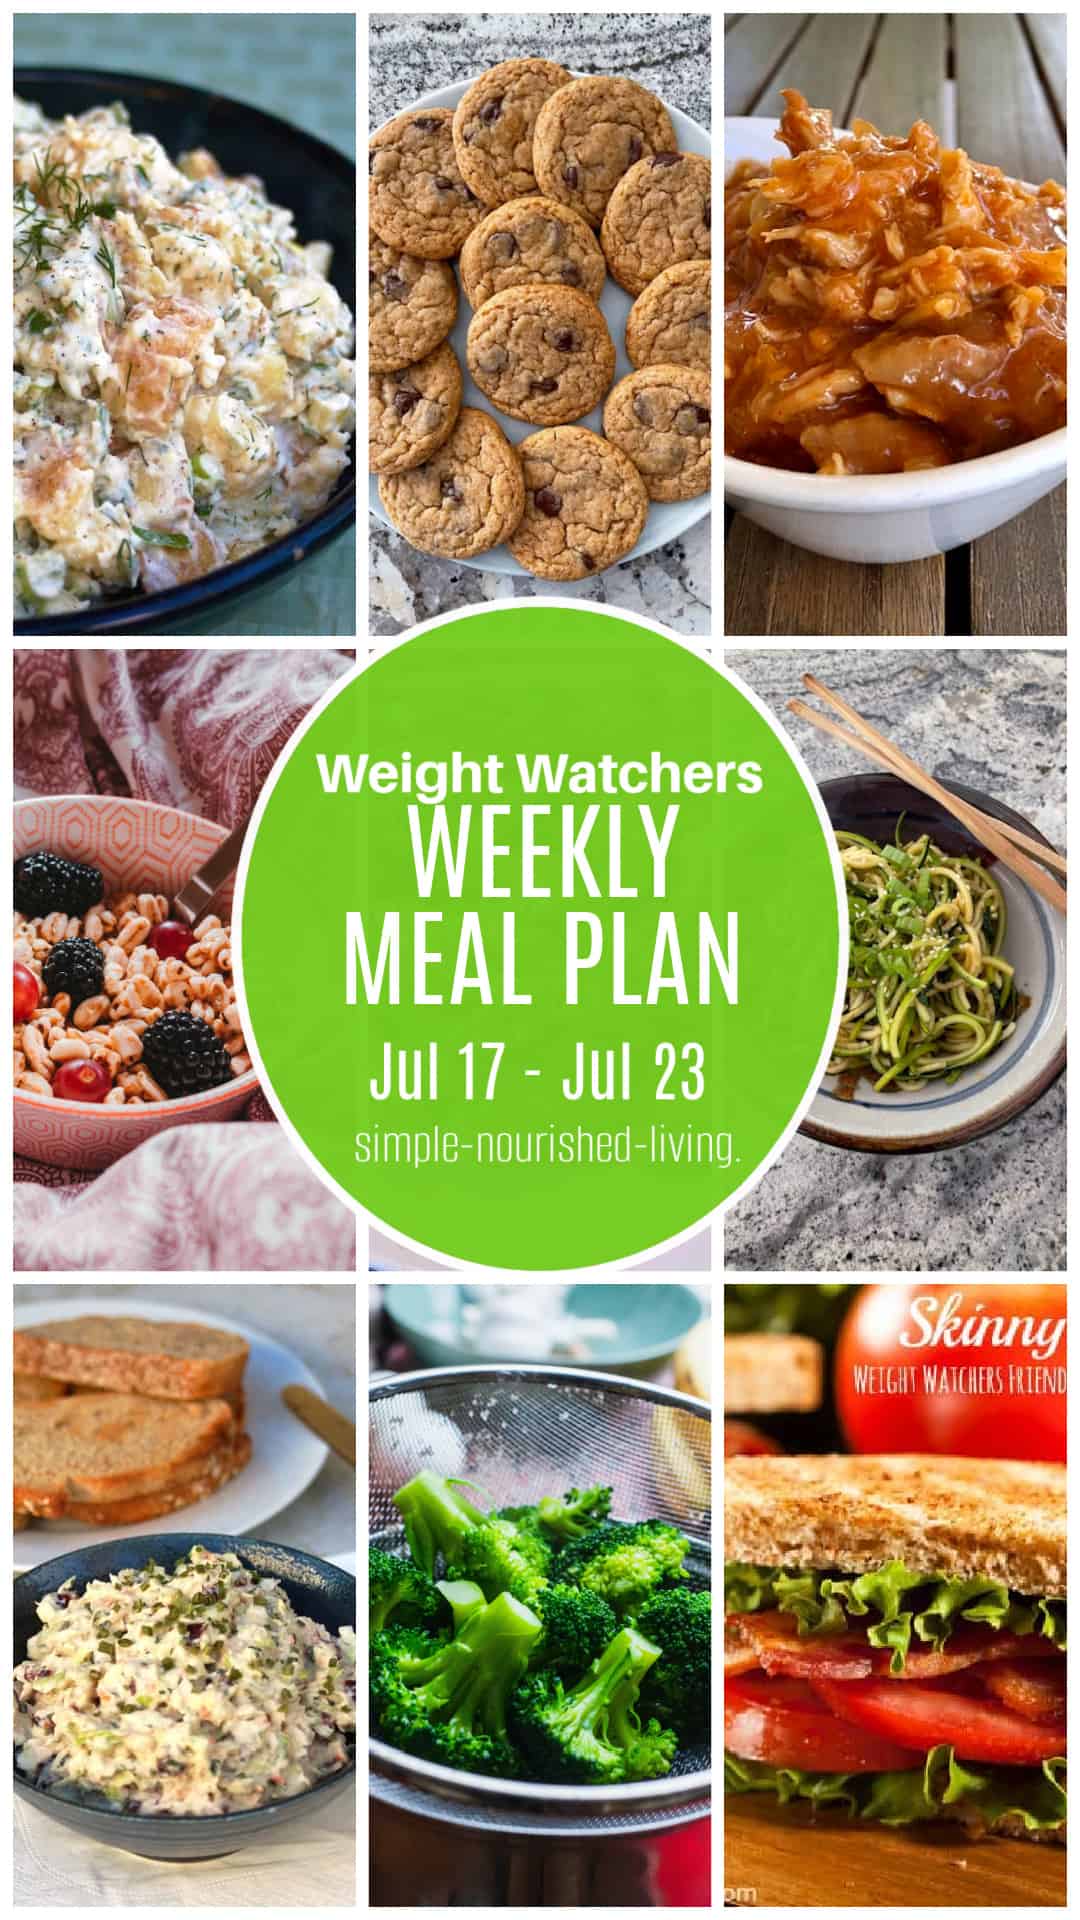 9 frame collage: dil potato salad, peanut butter chocolate chip cookies on a white plate, white bowl of shredded honey sriarcha chicken, bowl of cereal with fruit, cold sesame zucchini noodles, blue pottery bowl with crunchy tuna salad with toast behind, bowl of steamed broccoli, half BLT Round Green Text Box Overlay: Weight Watchers Weekly Meal Plan July 17 - July23